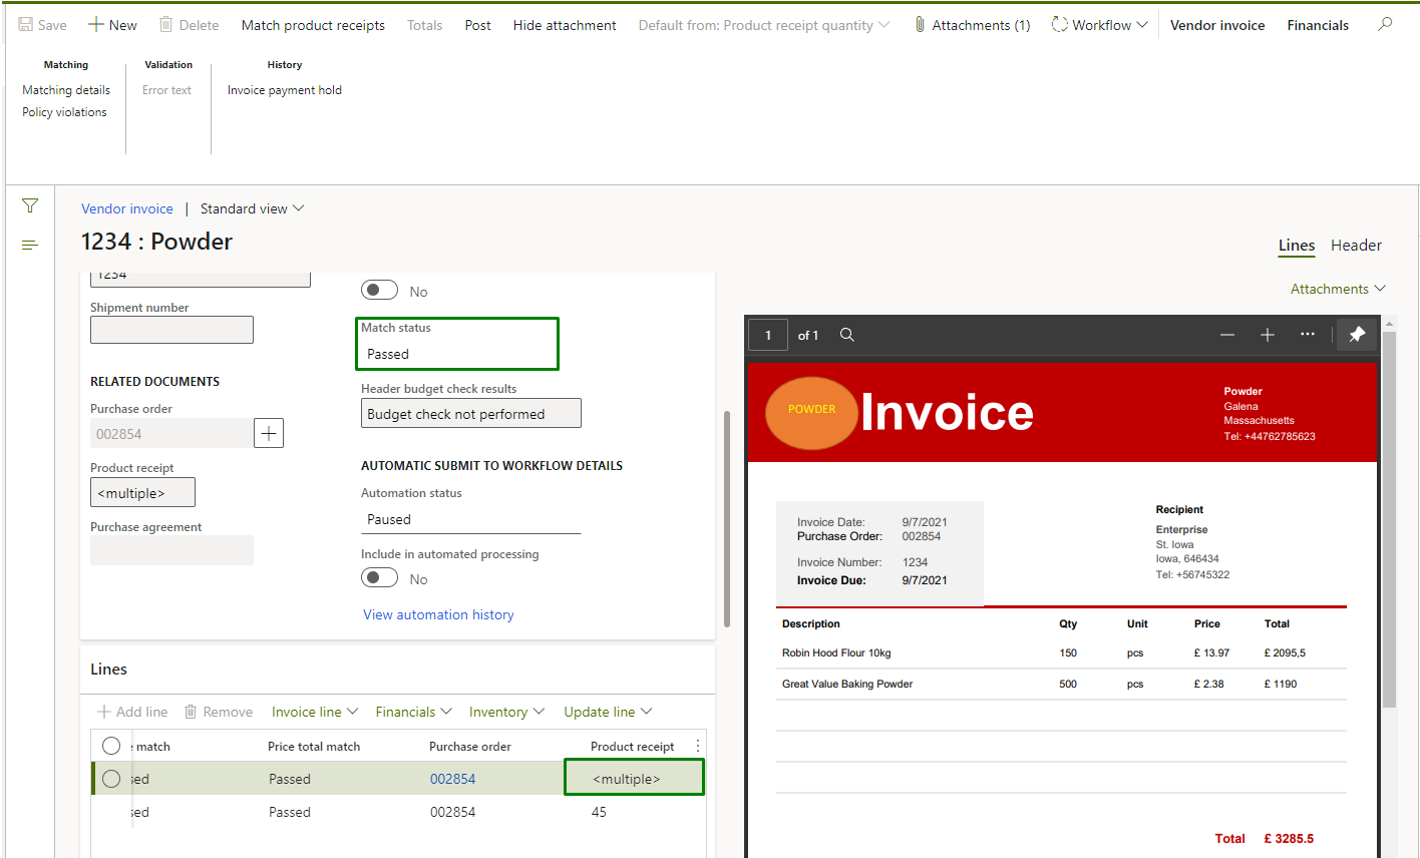 Vendor invoice automation_Pic. 7 – Vendor invoice side by side view (revision after matching)